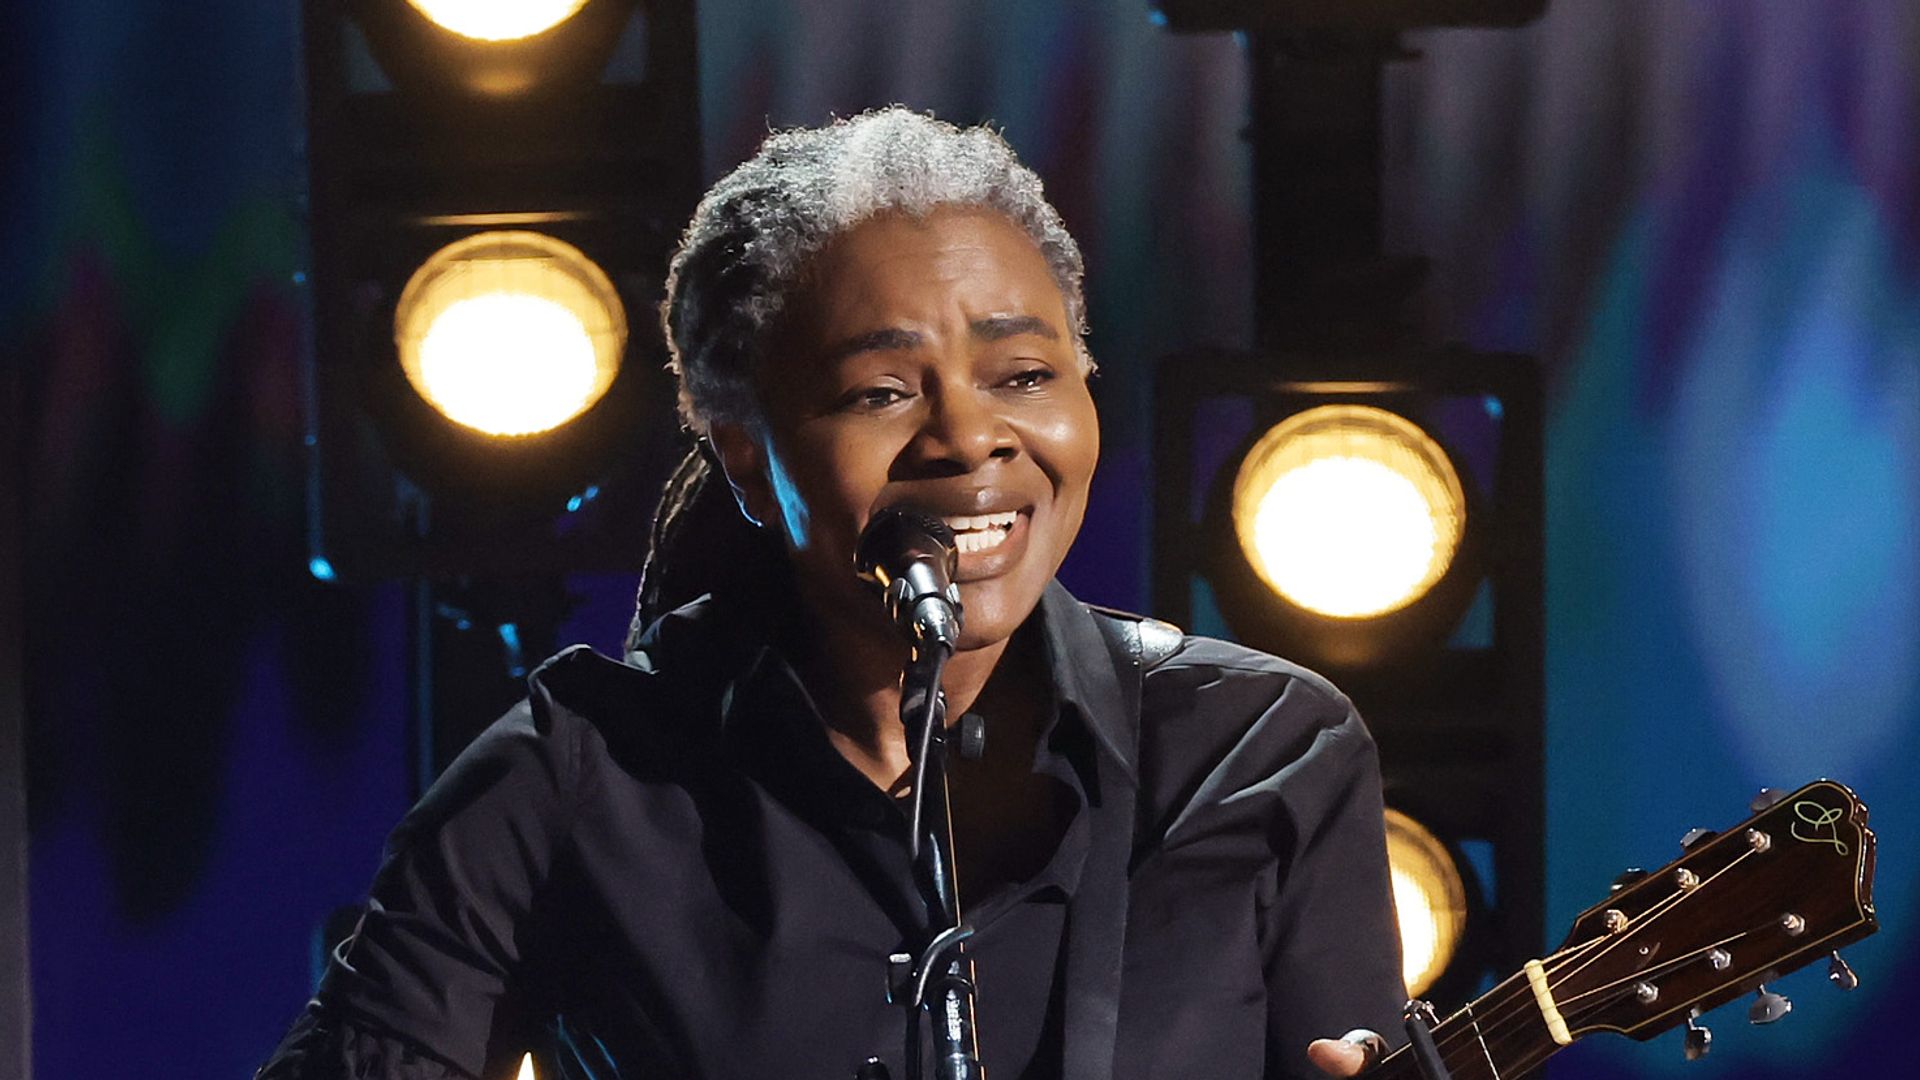 Tracy Chapman's very private life away from the spotlight revealed